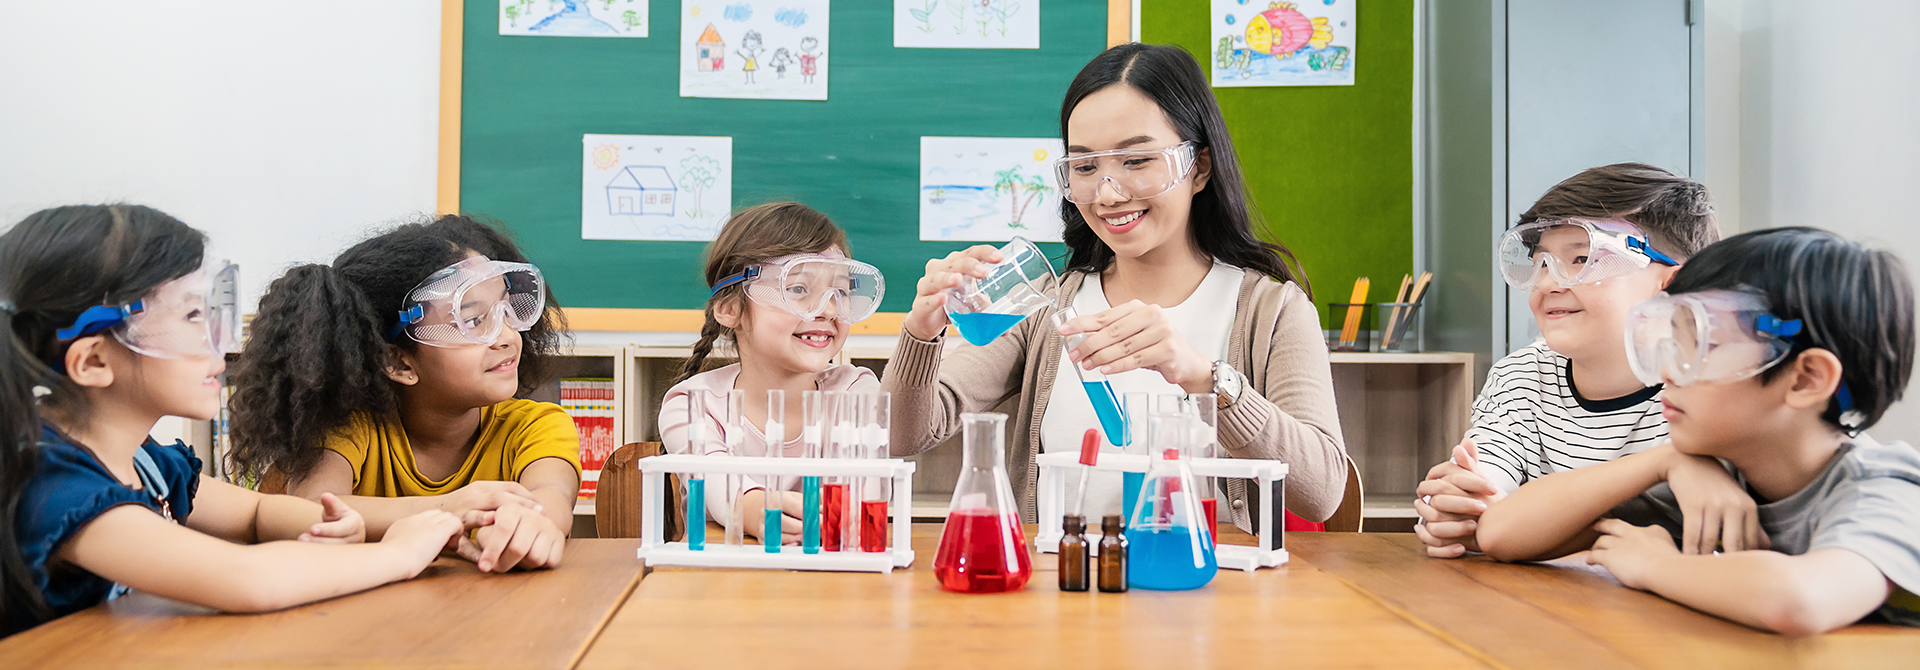 A picture of a teacher and students working on a science experiment together.